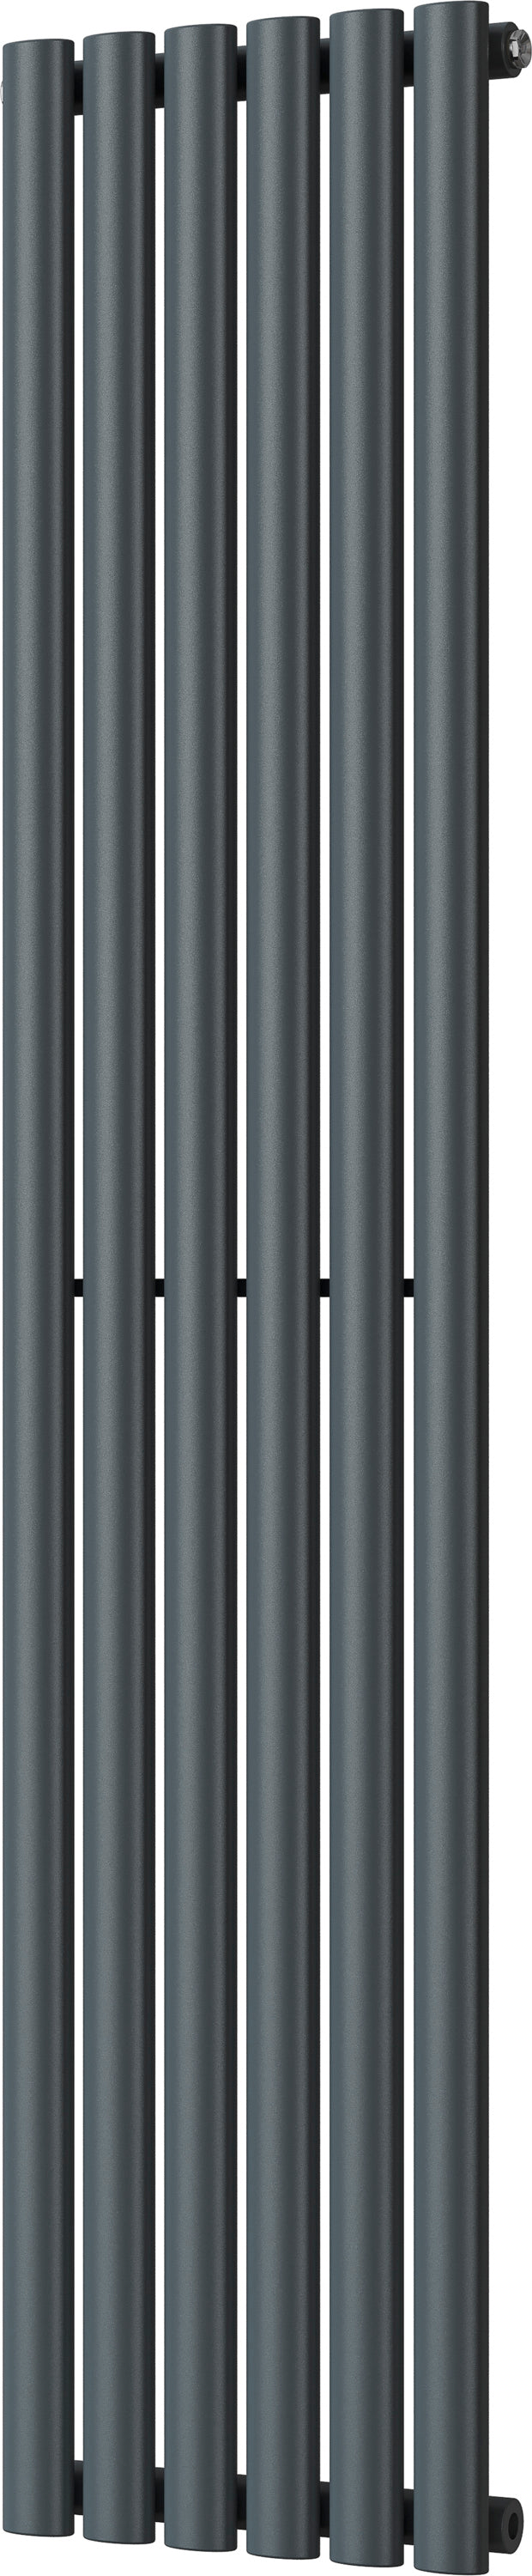 Omeara - Anthracite Vertical Radiator H1600mm x W348mm Single Panel